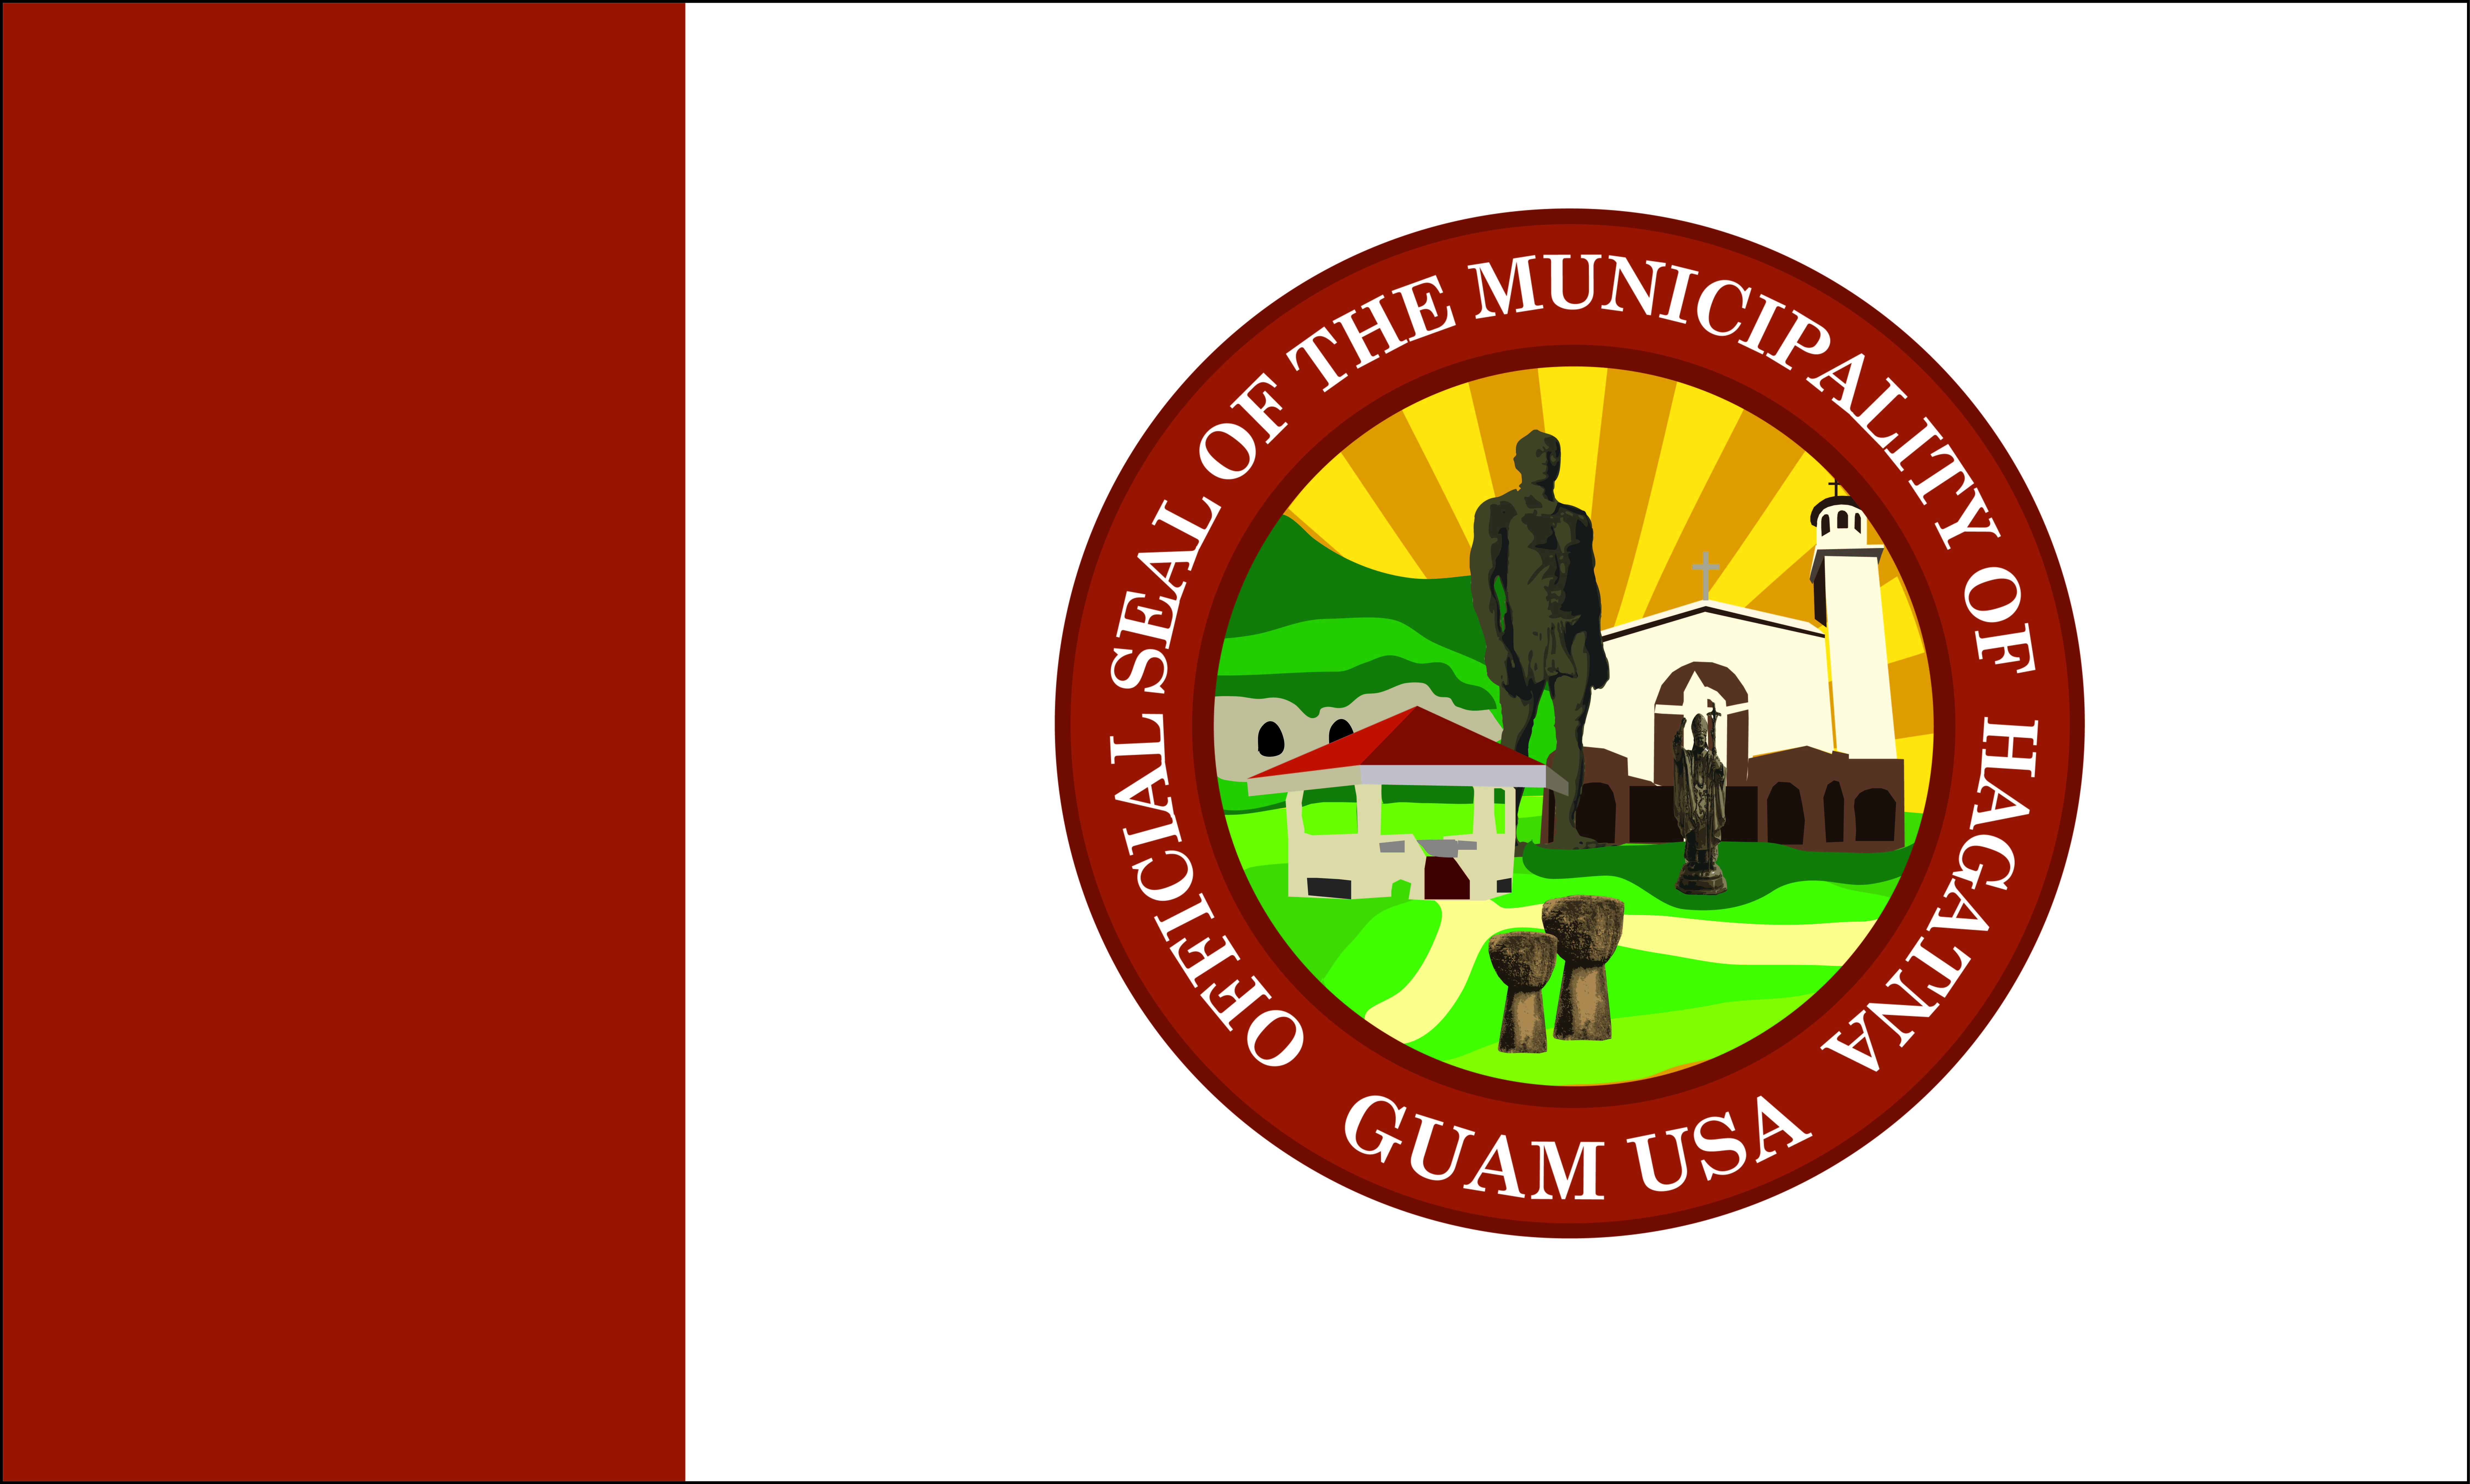 What is the capital of Guam?